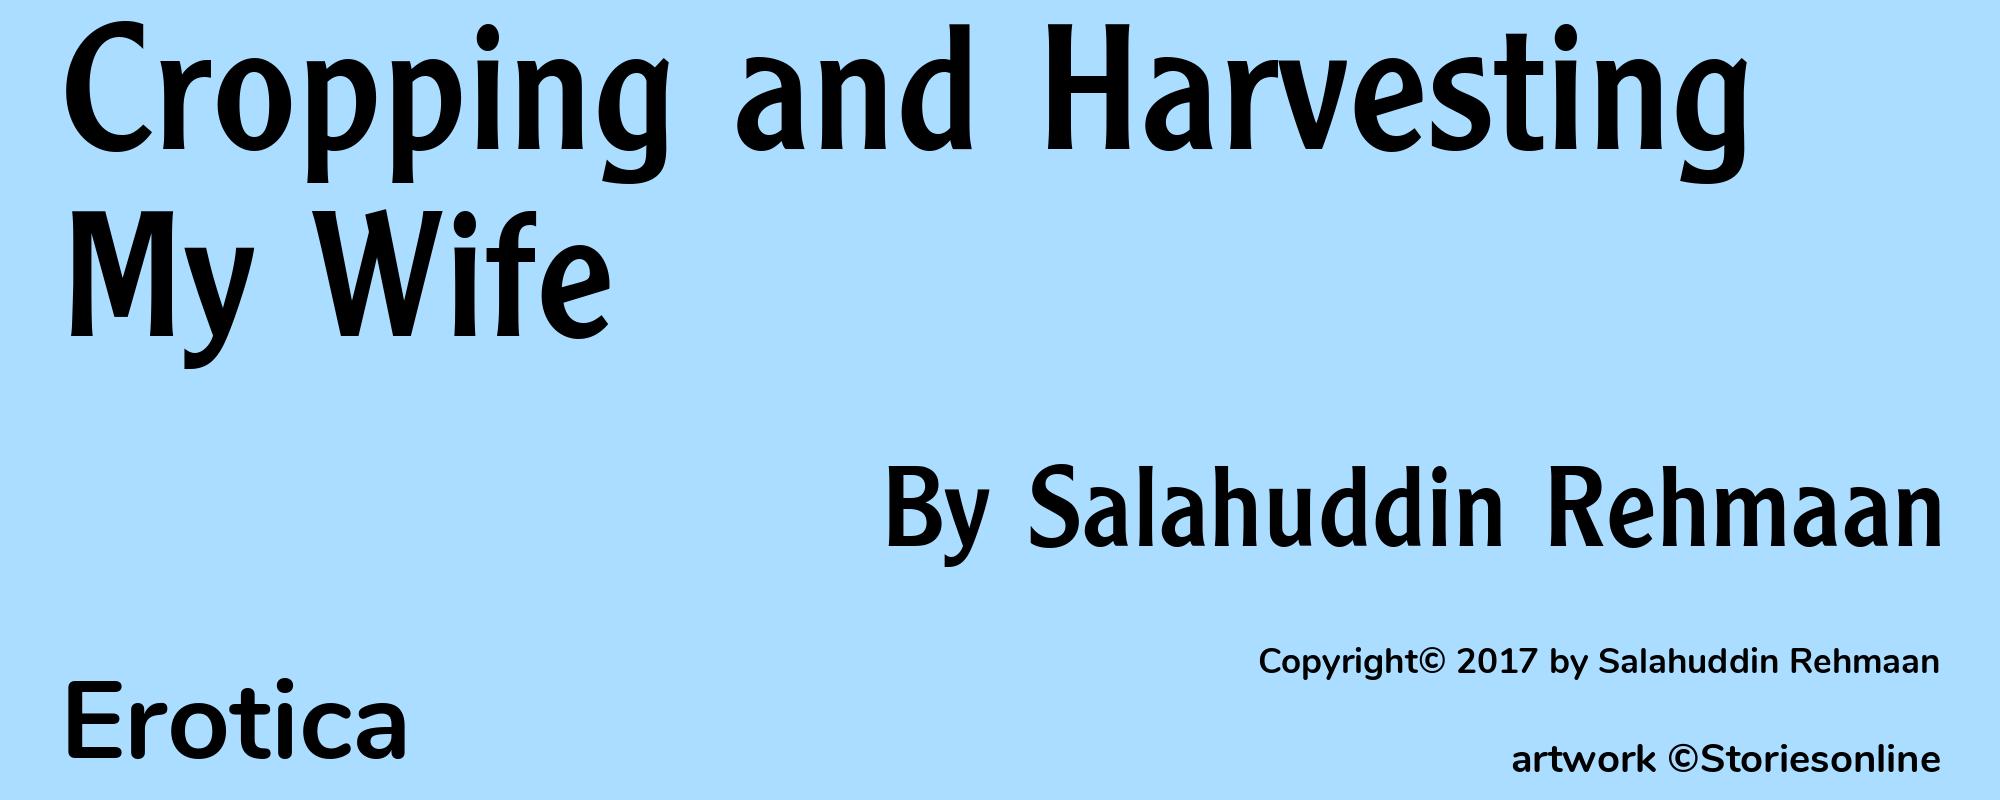 Cropping and Harvesting My Wife - Cover